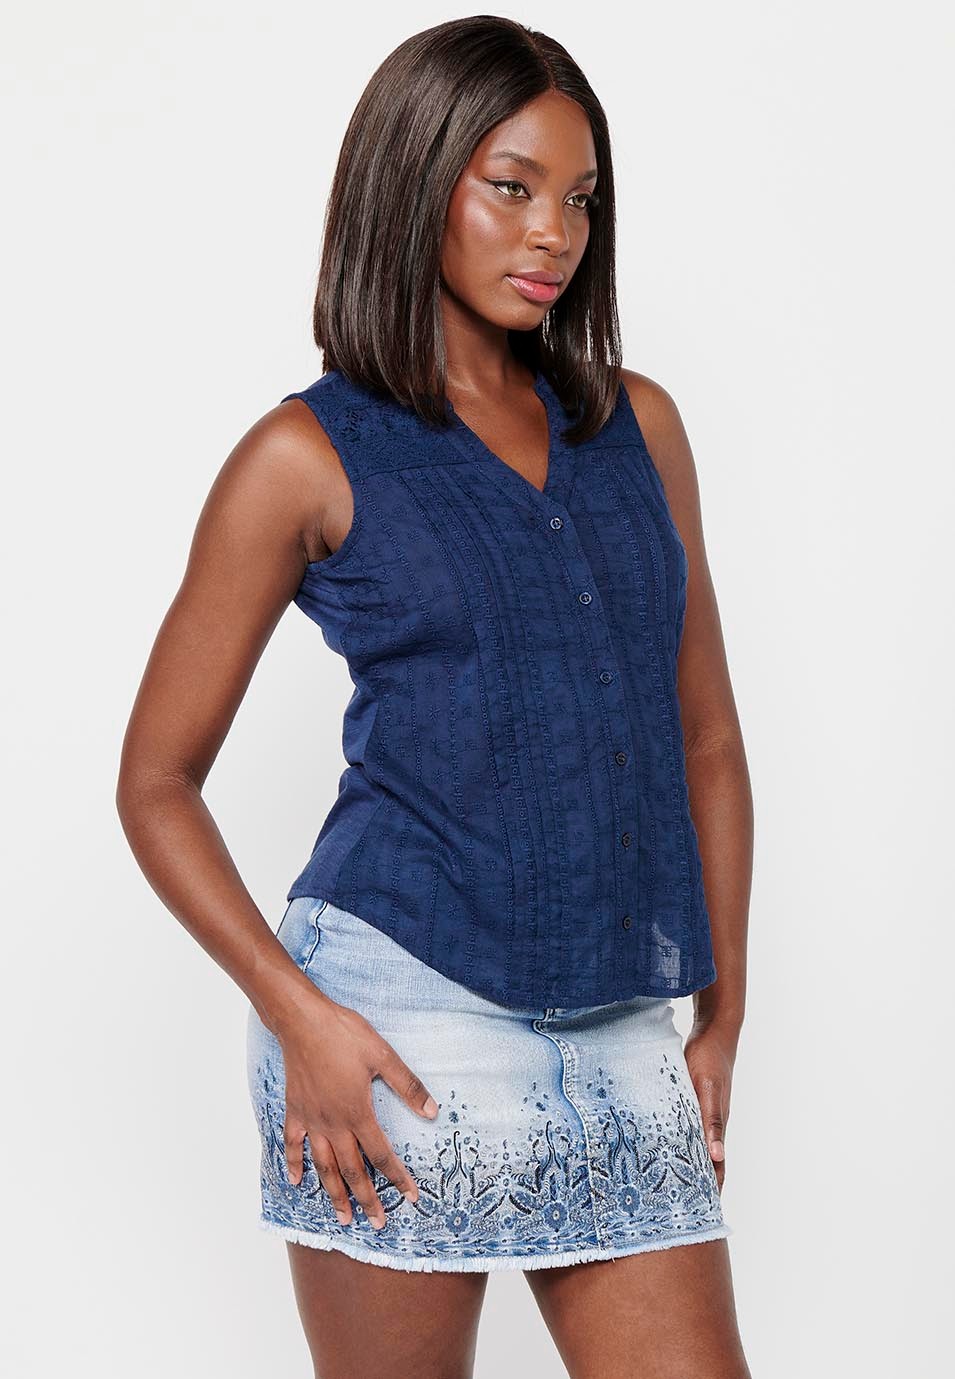 Embroidered Fabric Sleeveless Blouse with V-Neckline and Front Closure with Navy Color Buttons for Women 6